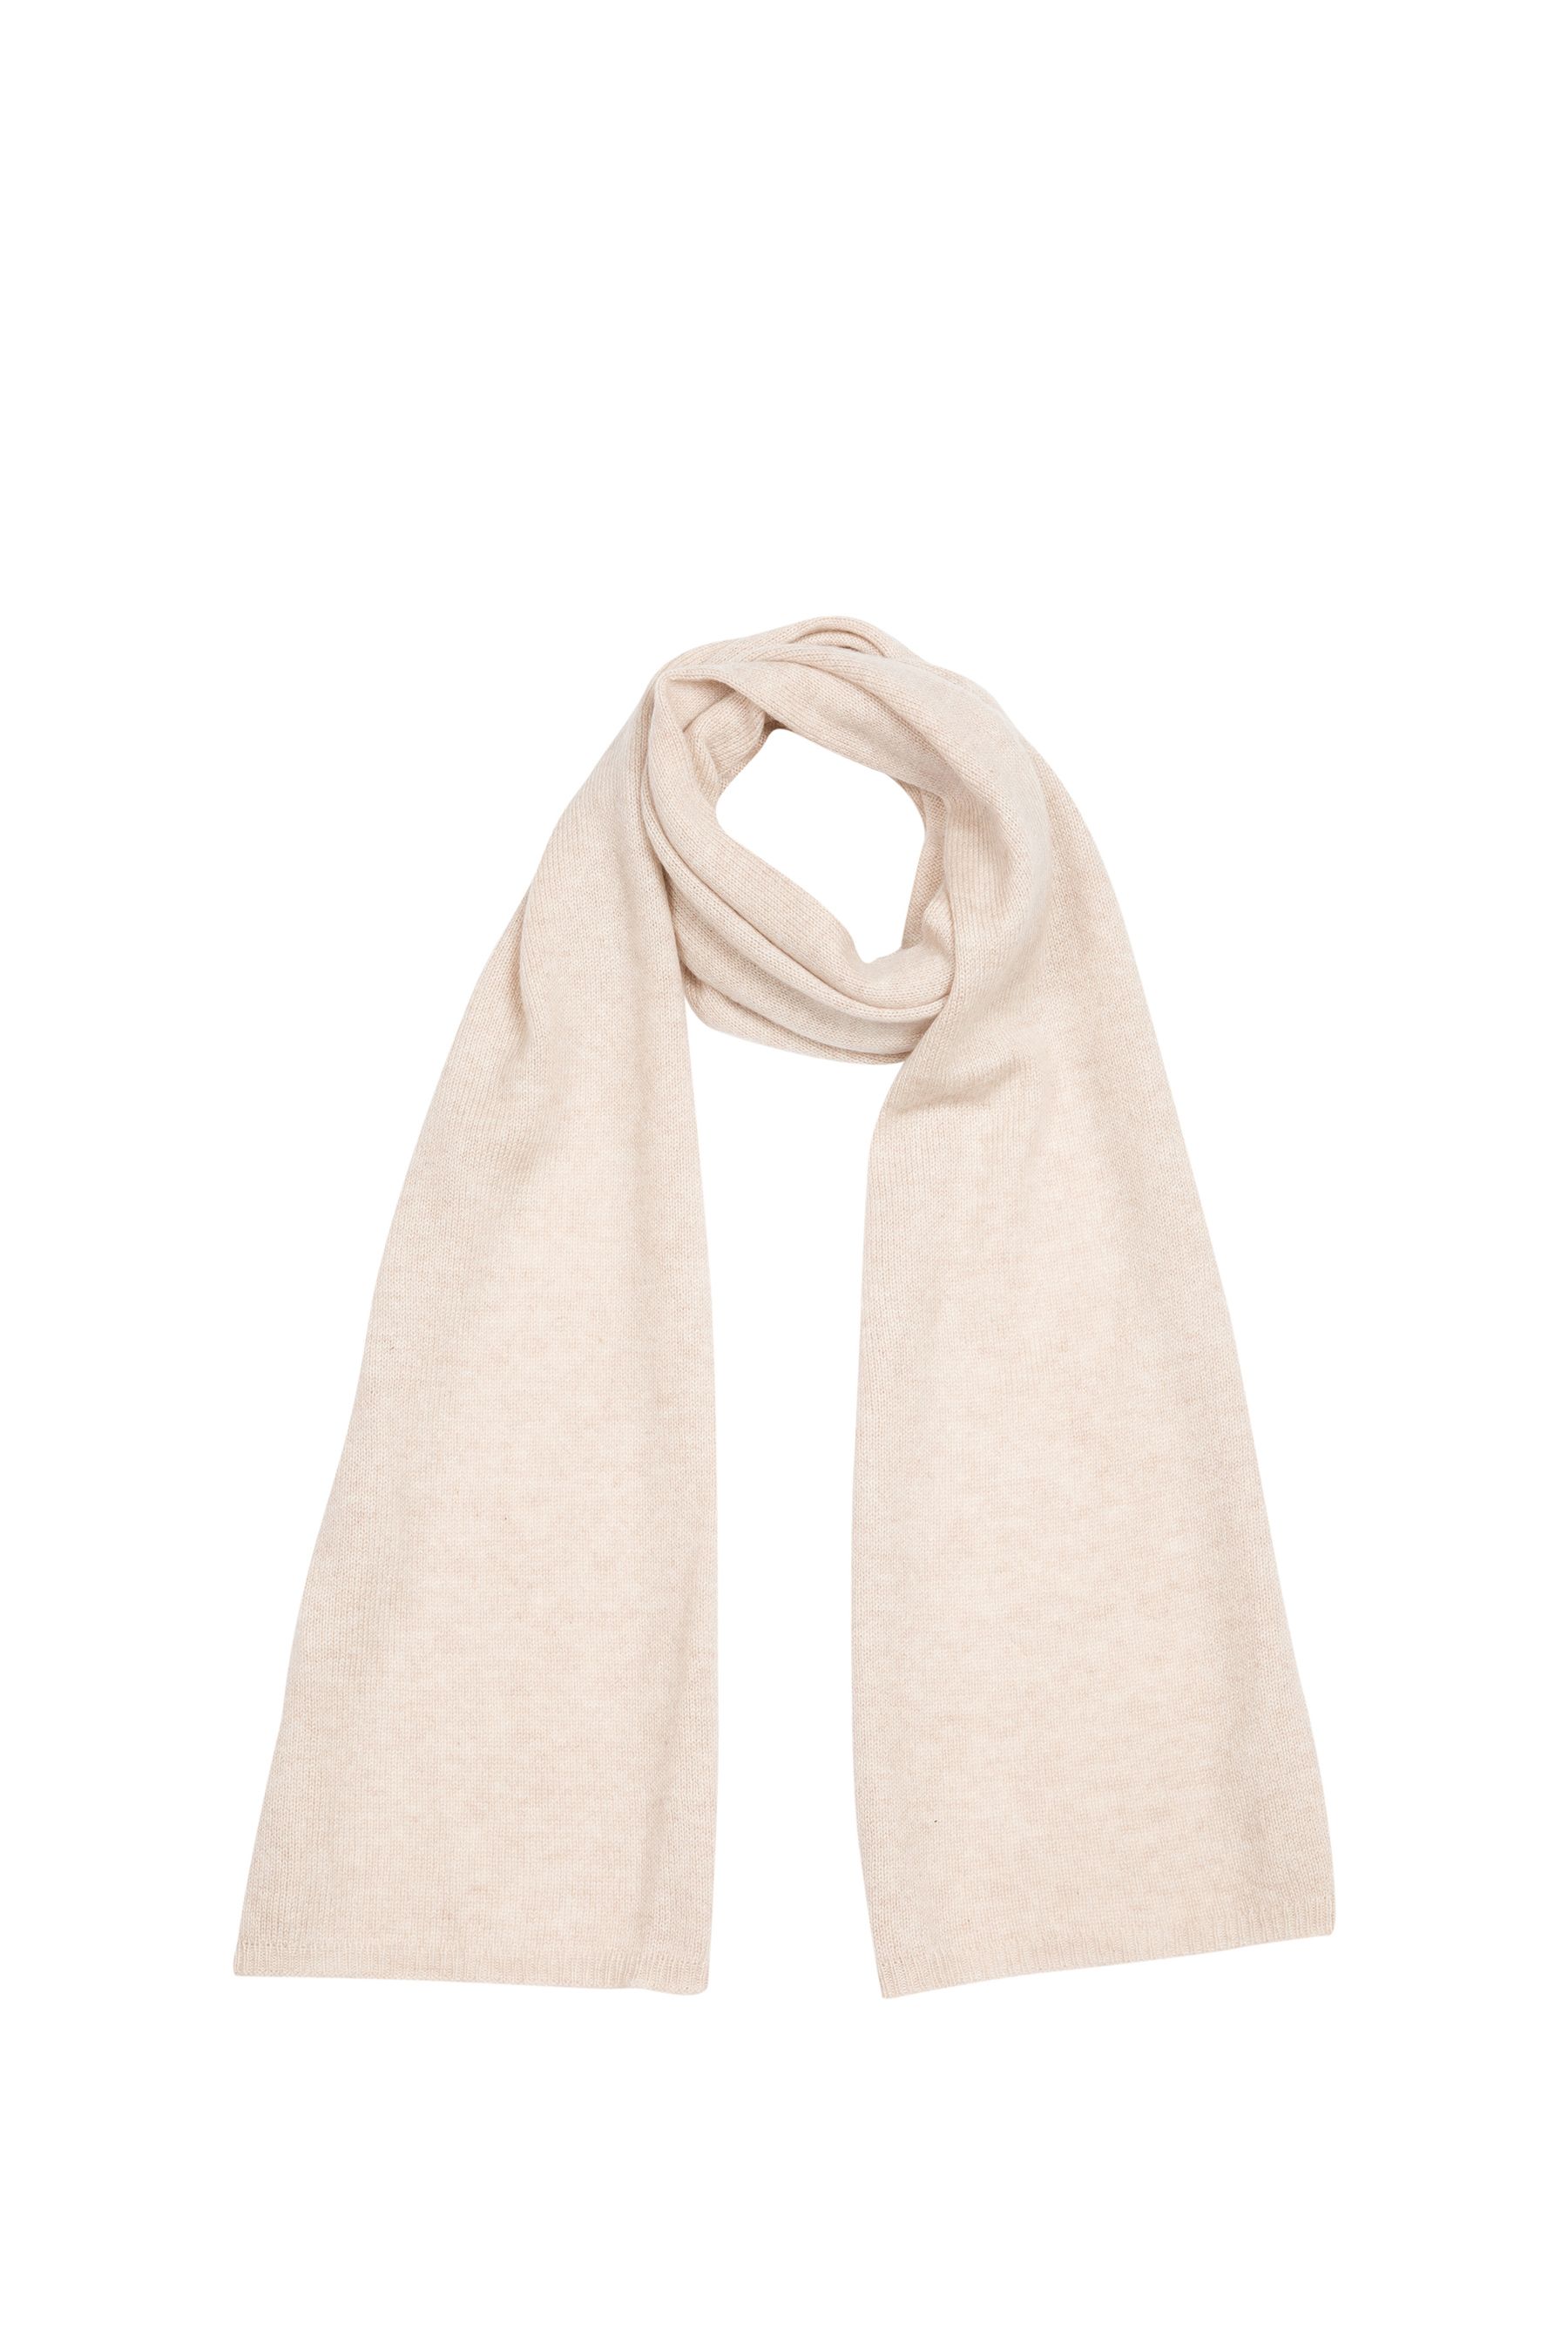 Buy Pure Luxuries London Cream Oxford Cashmere Scarf from the Next UK ...